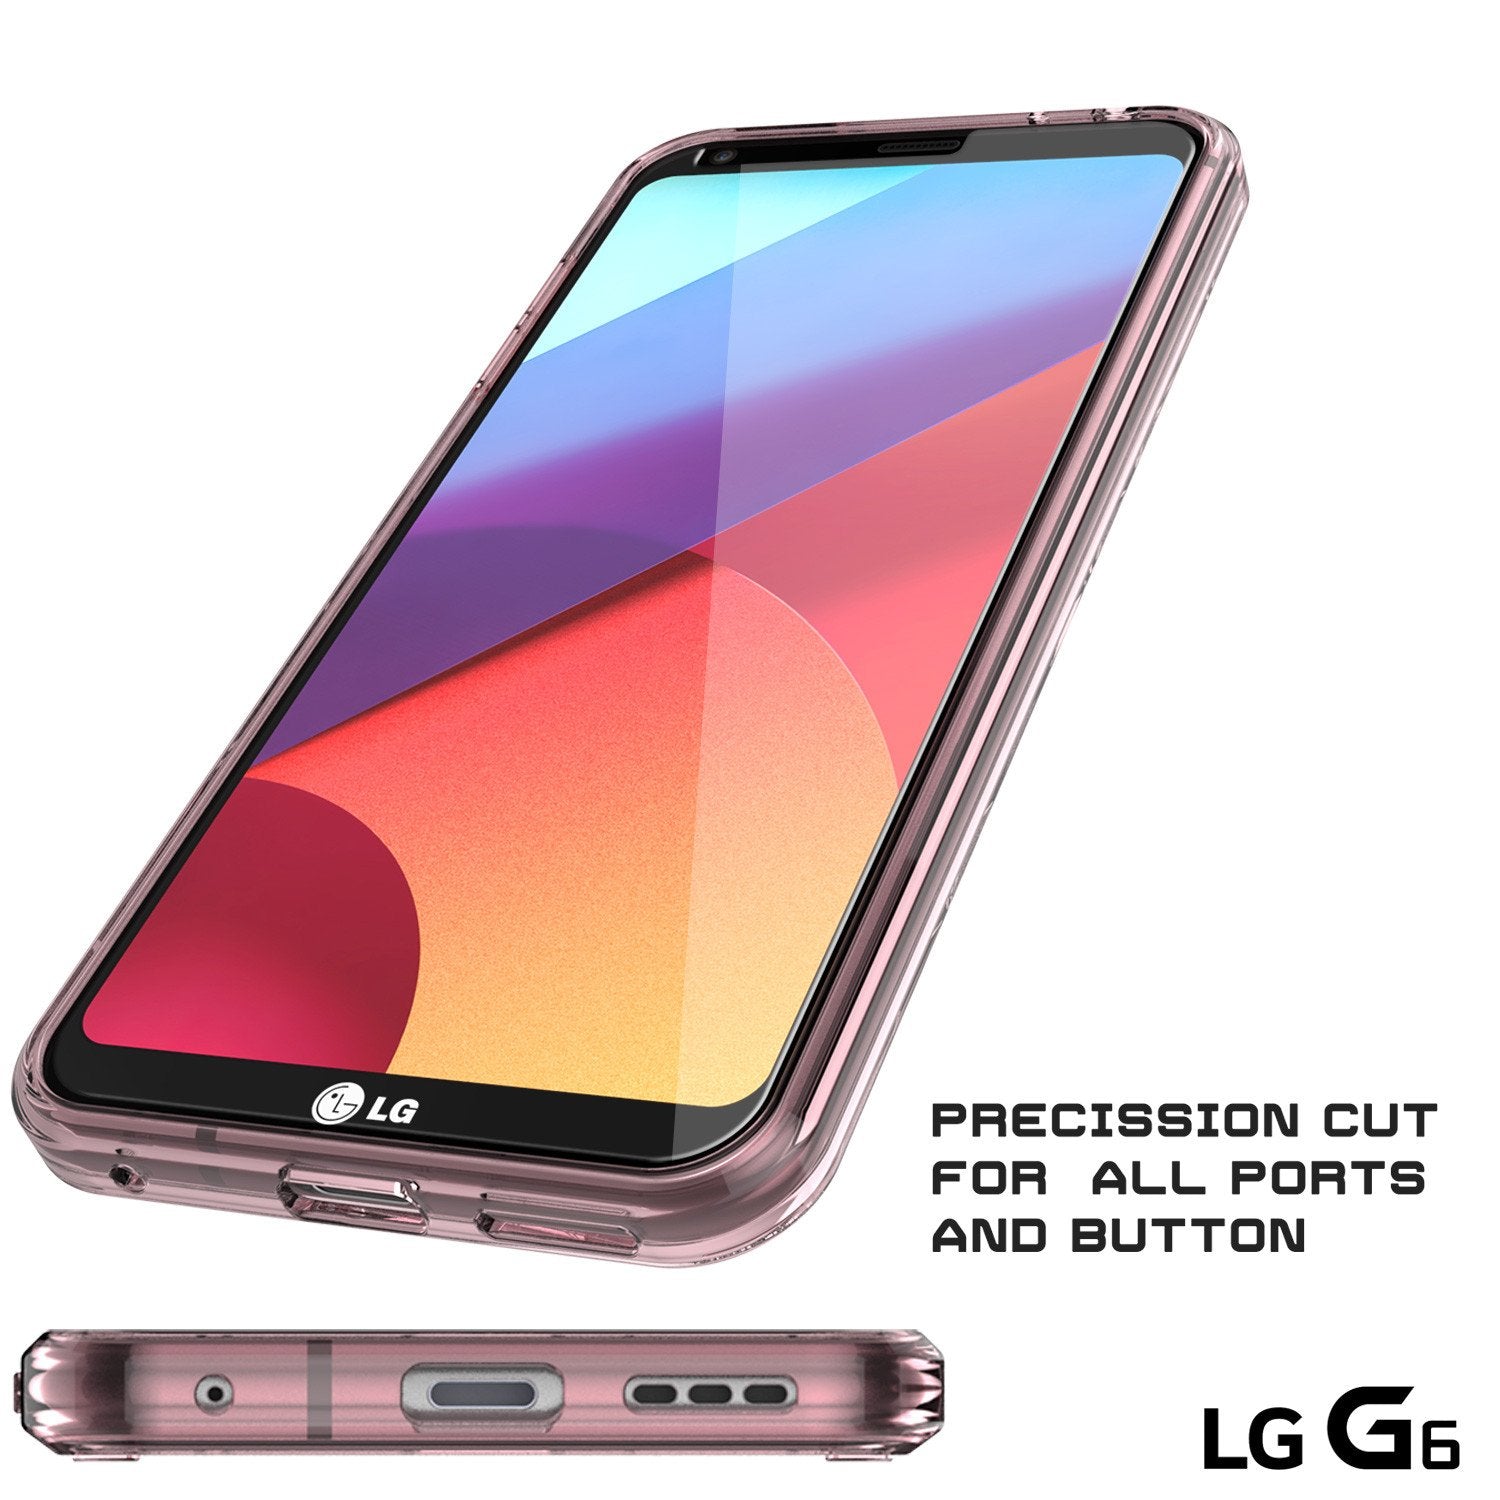 LG G6 Case Punkcase® LUCID 2.0 Crystal Pink Series w/ PUNK SHIELD Screen Protector | Ultra Fit